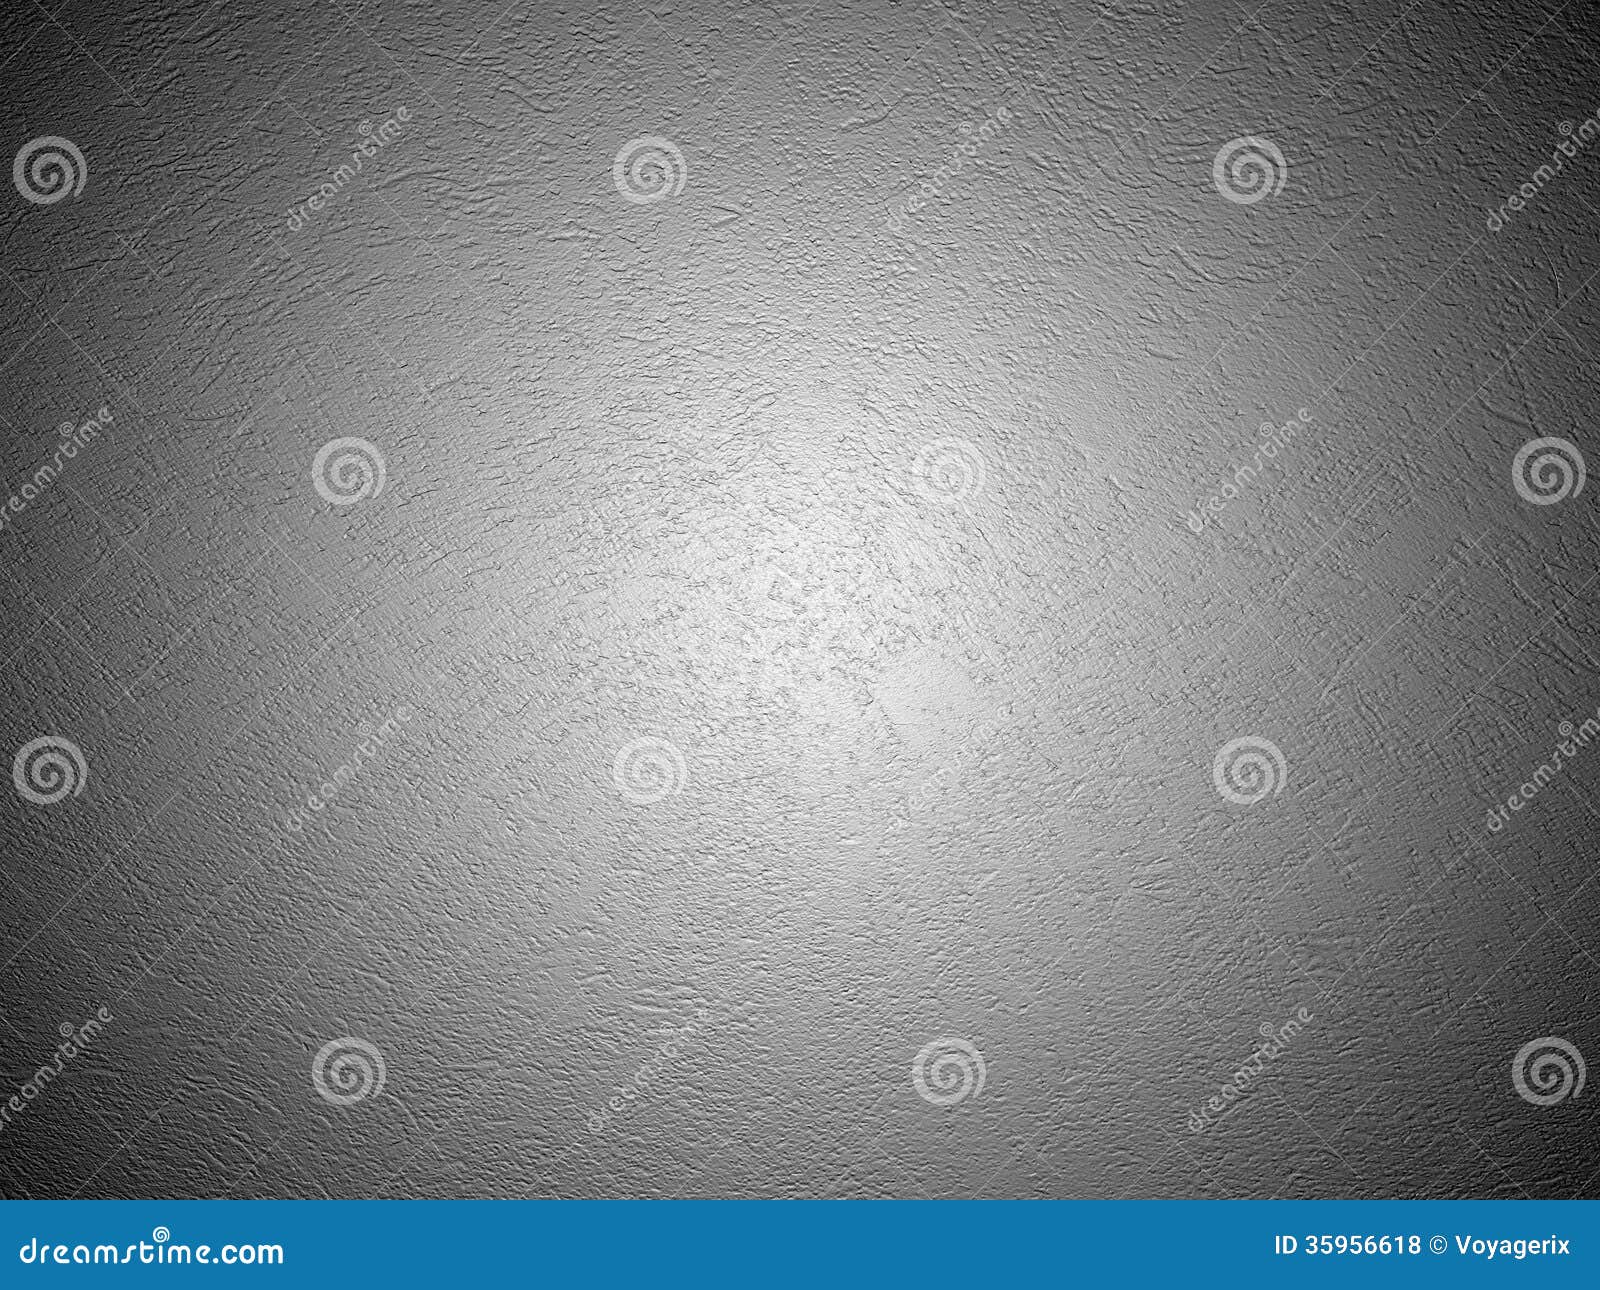 Abstract Grunge Metal Background Stock Photo - Image of wall, template ...